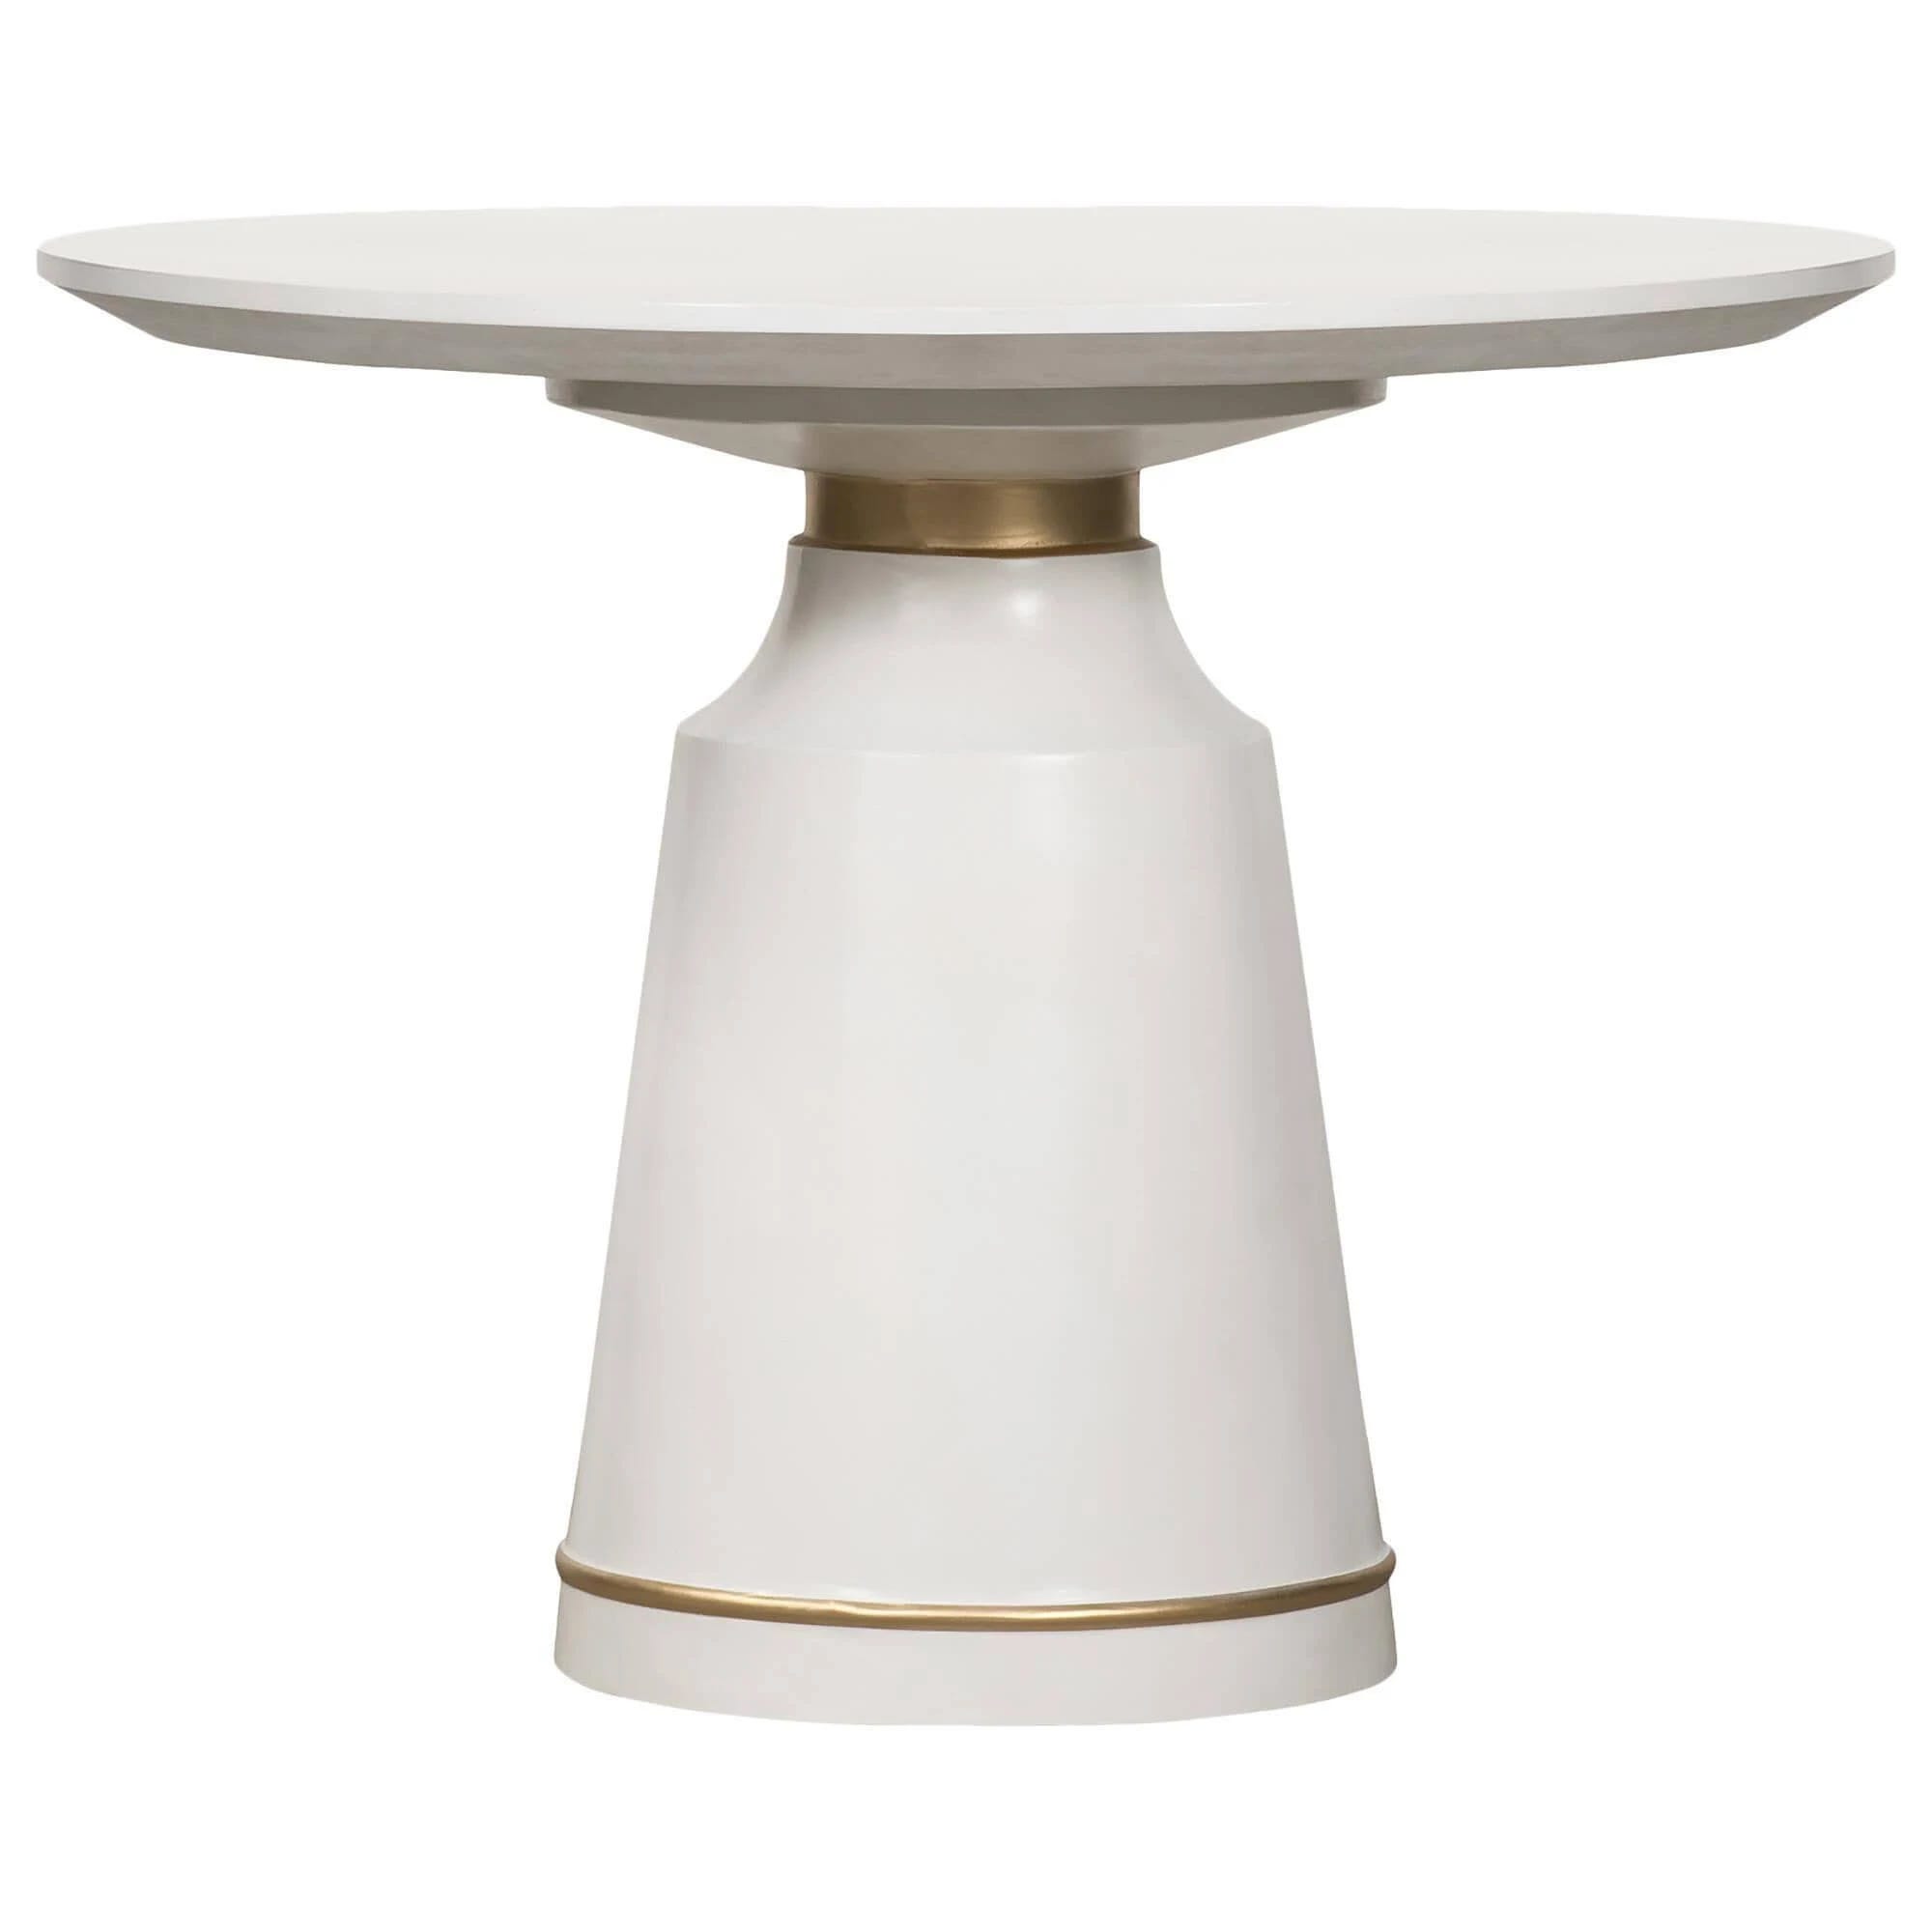 Concrete White Kitchen Dining Table with Bronze Accent | Image